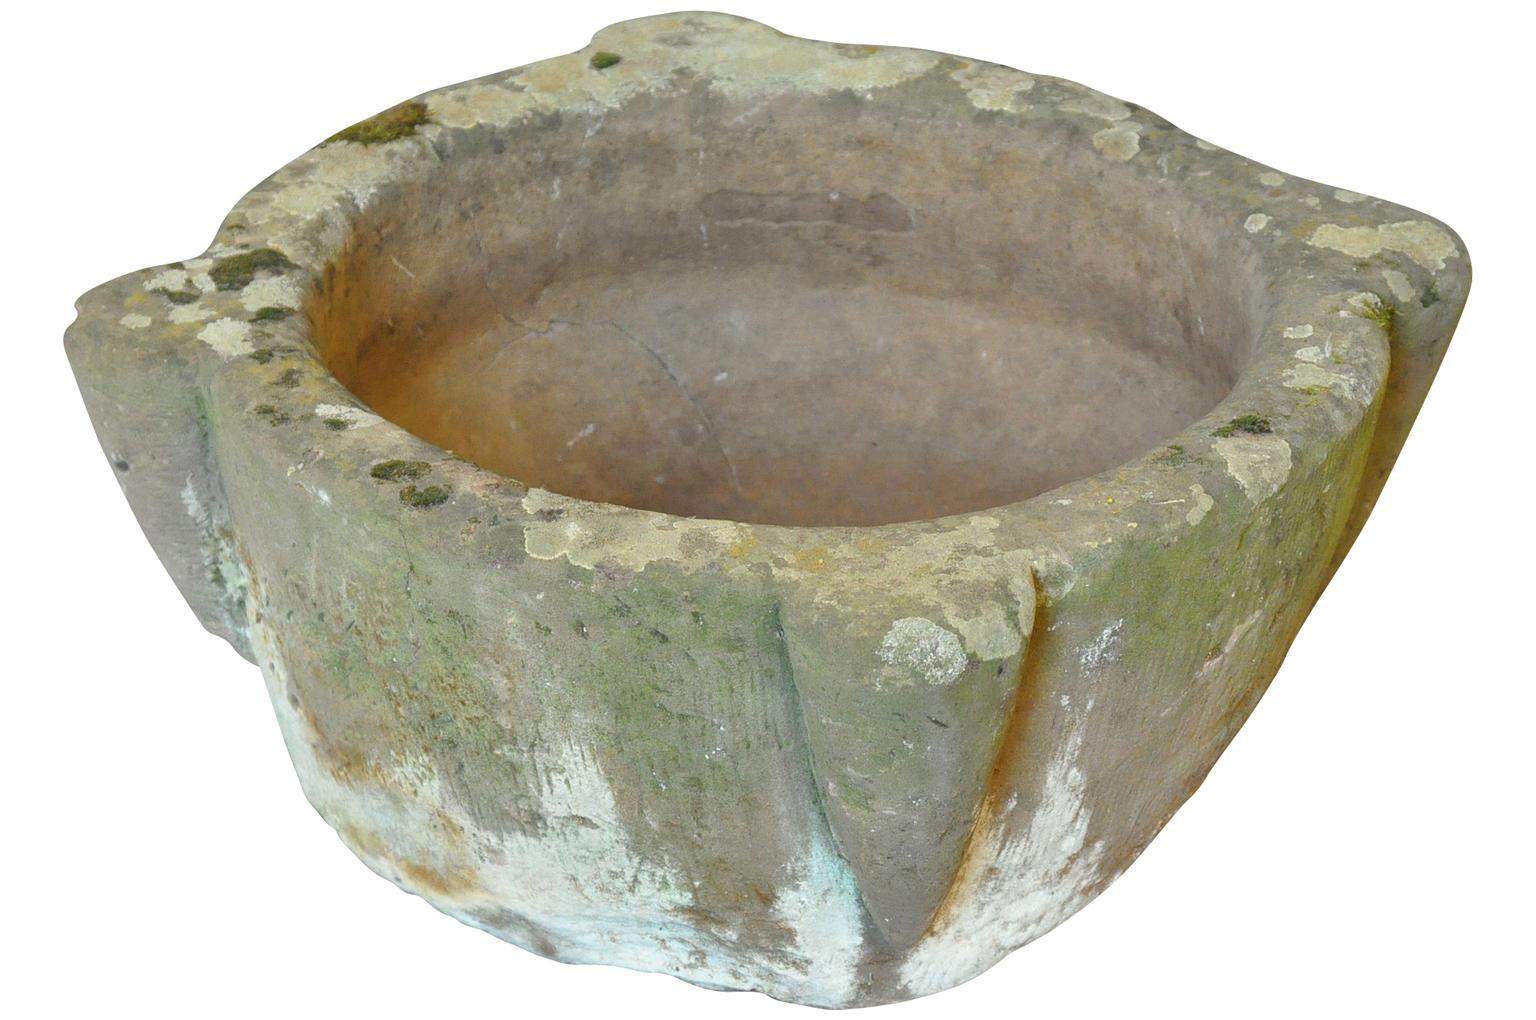 An exceptional 18th century stone Baptismal font from the South of France. Beautifully hand-sculpted with a sensational patina. Perfect as a water feature or vessel for any garden or interior.